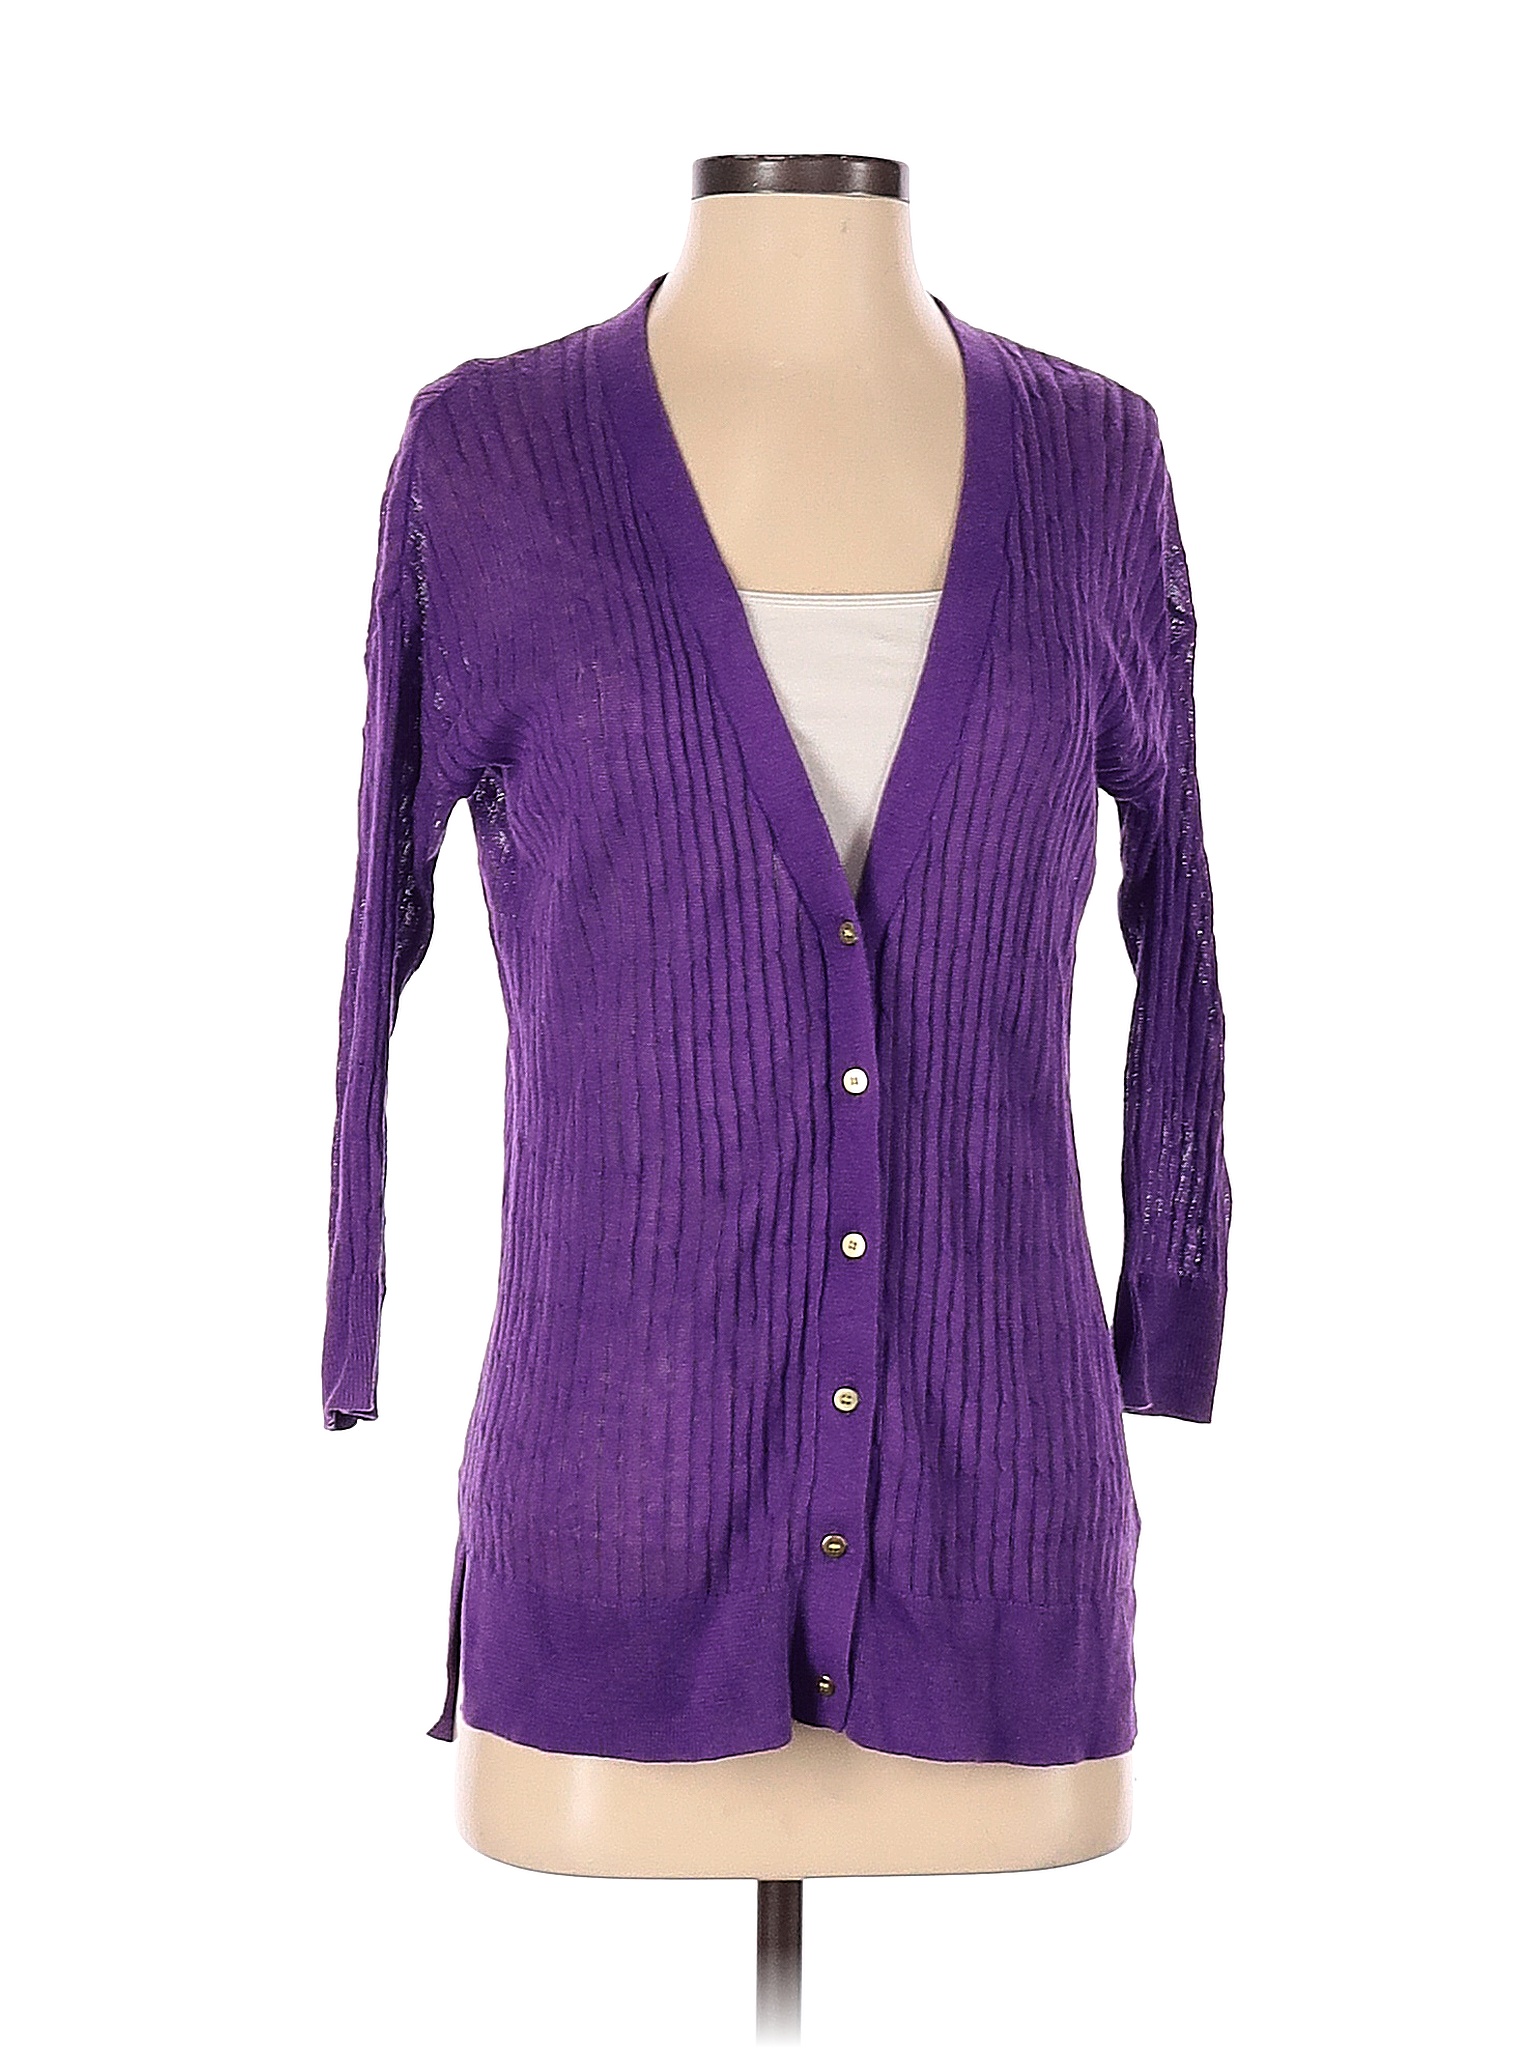 JCPenney Solid Purple Cardigan Size S - 70% off | thredUP